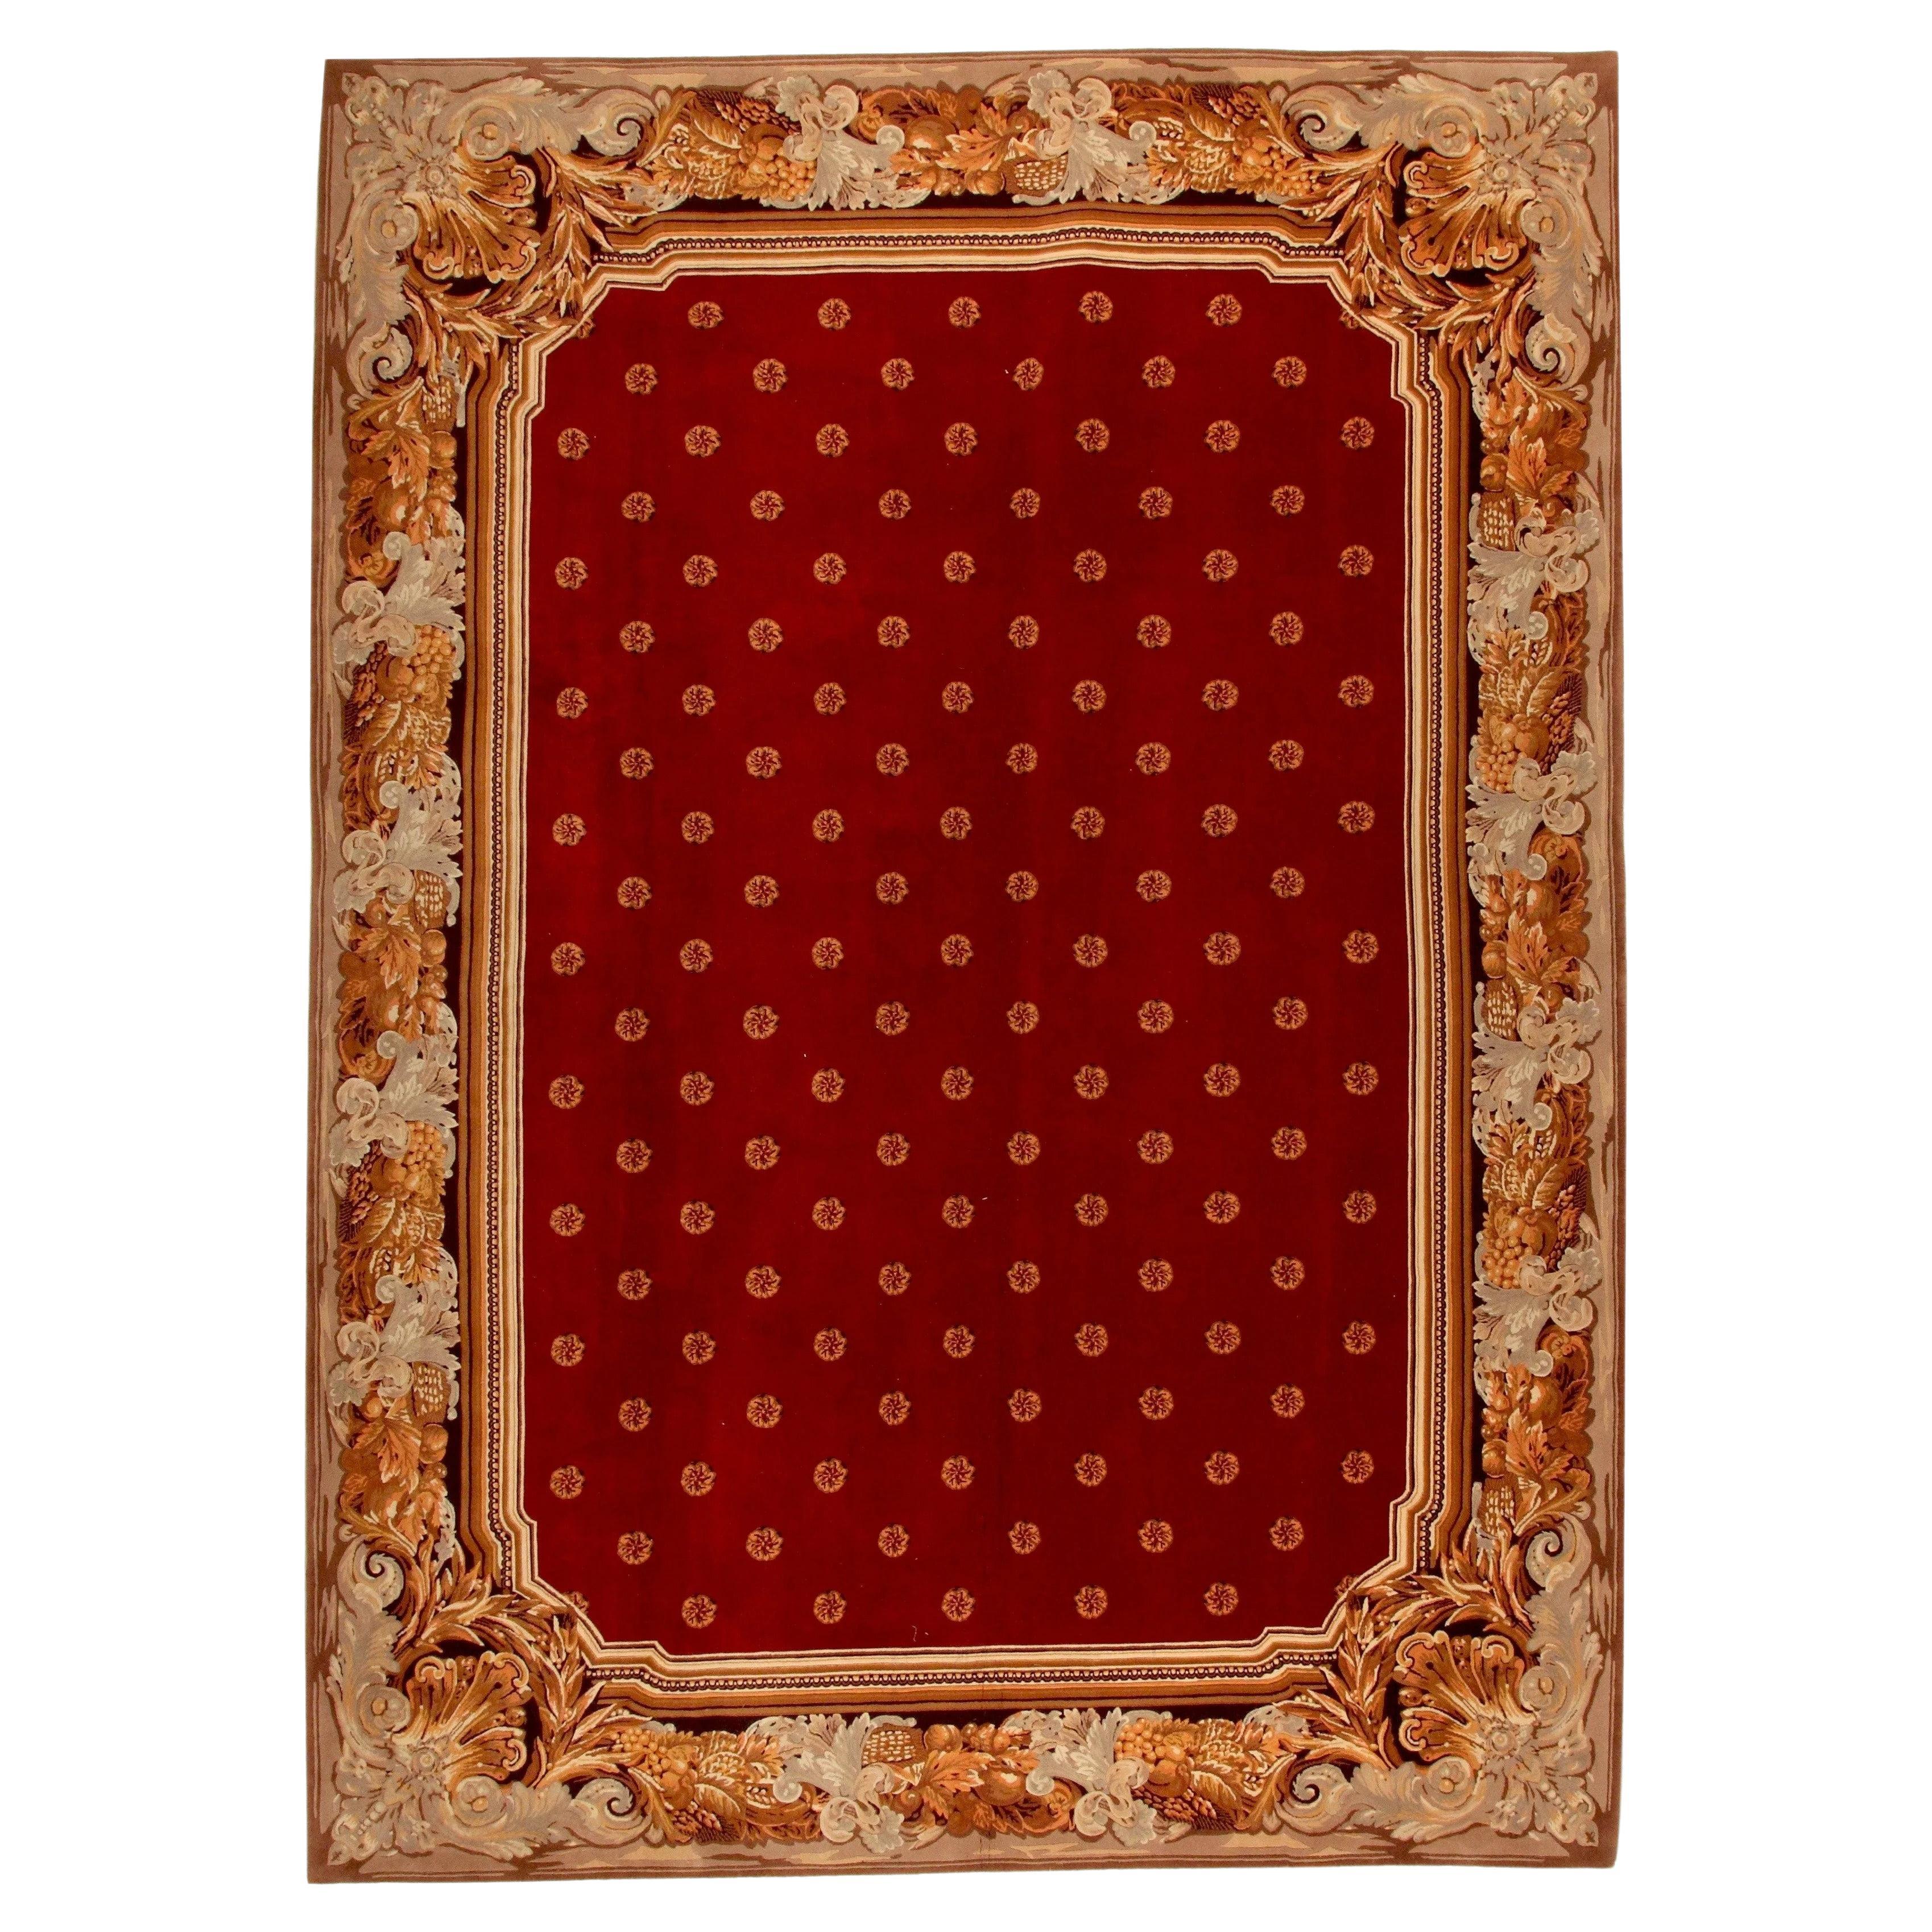 VIA COMO 'Ferutage Rosso' Hand Knotted Fine Wool Rug 9x12 ft RARE One of a Kind